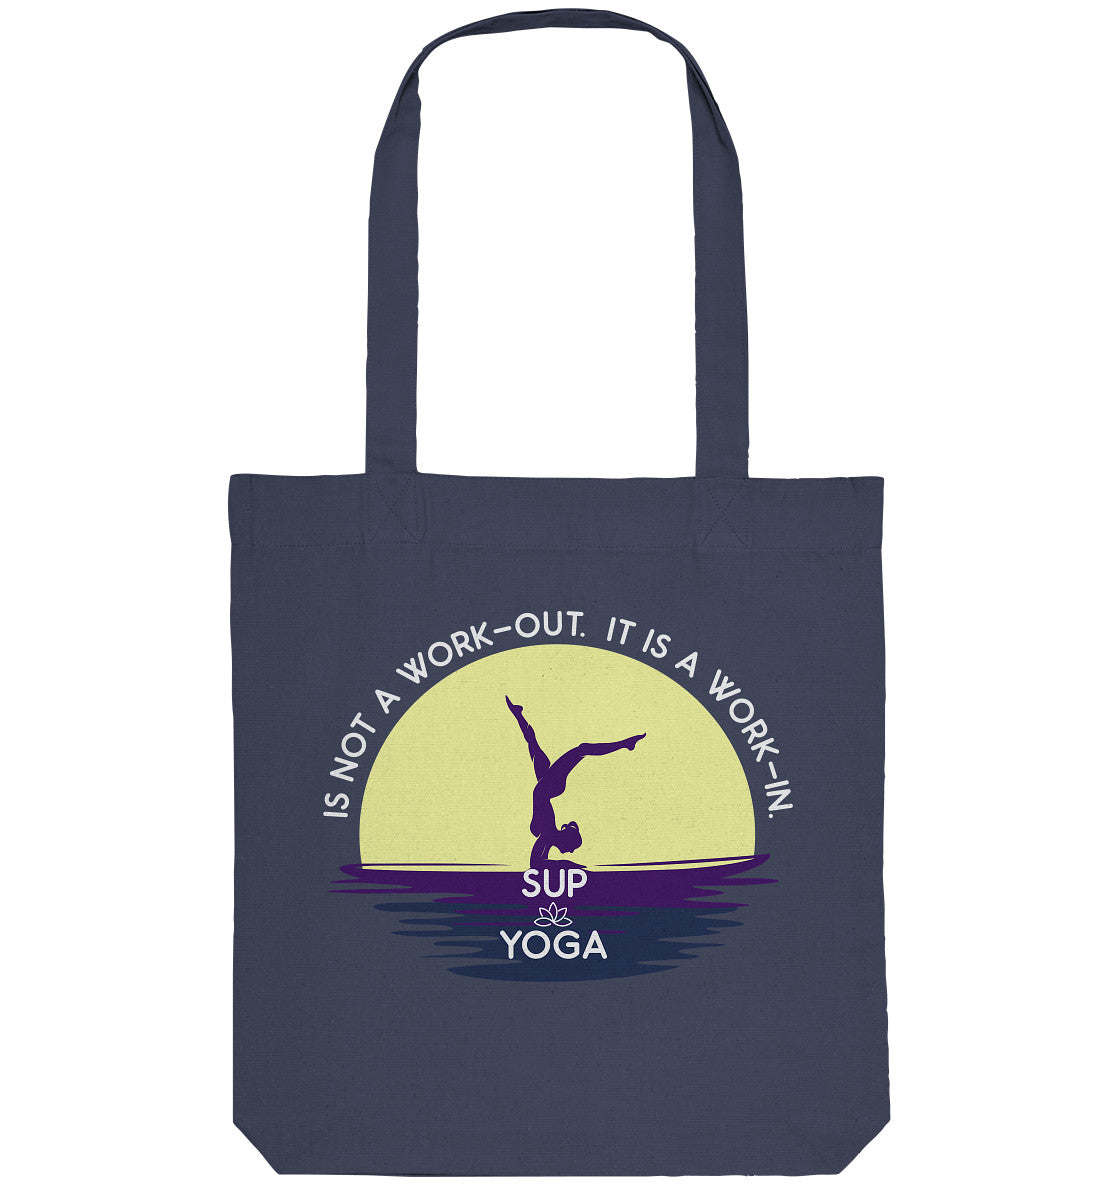 SUP YOGA IS NOT A WORK-OUT.  IT IS A WORK-IN.  - Organic Tote-Bag